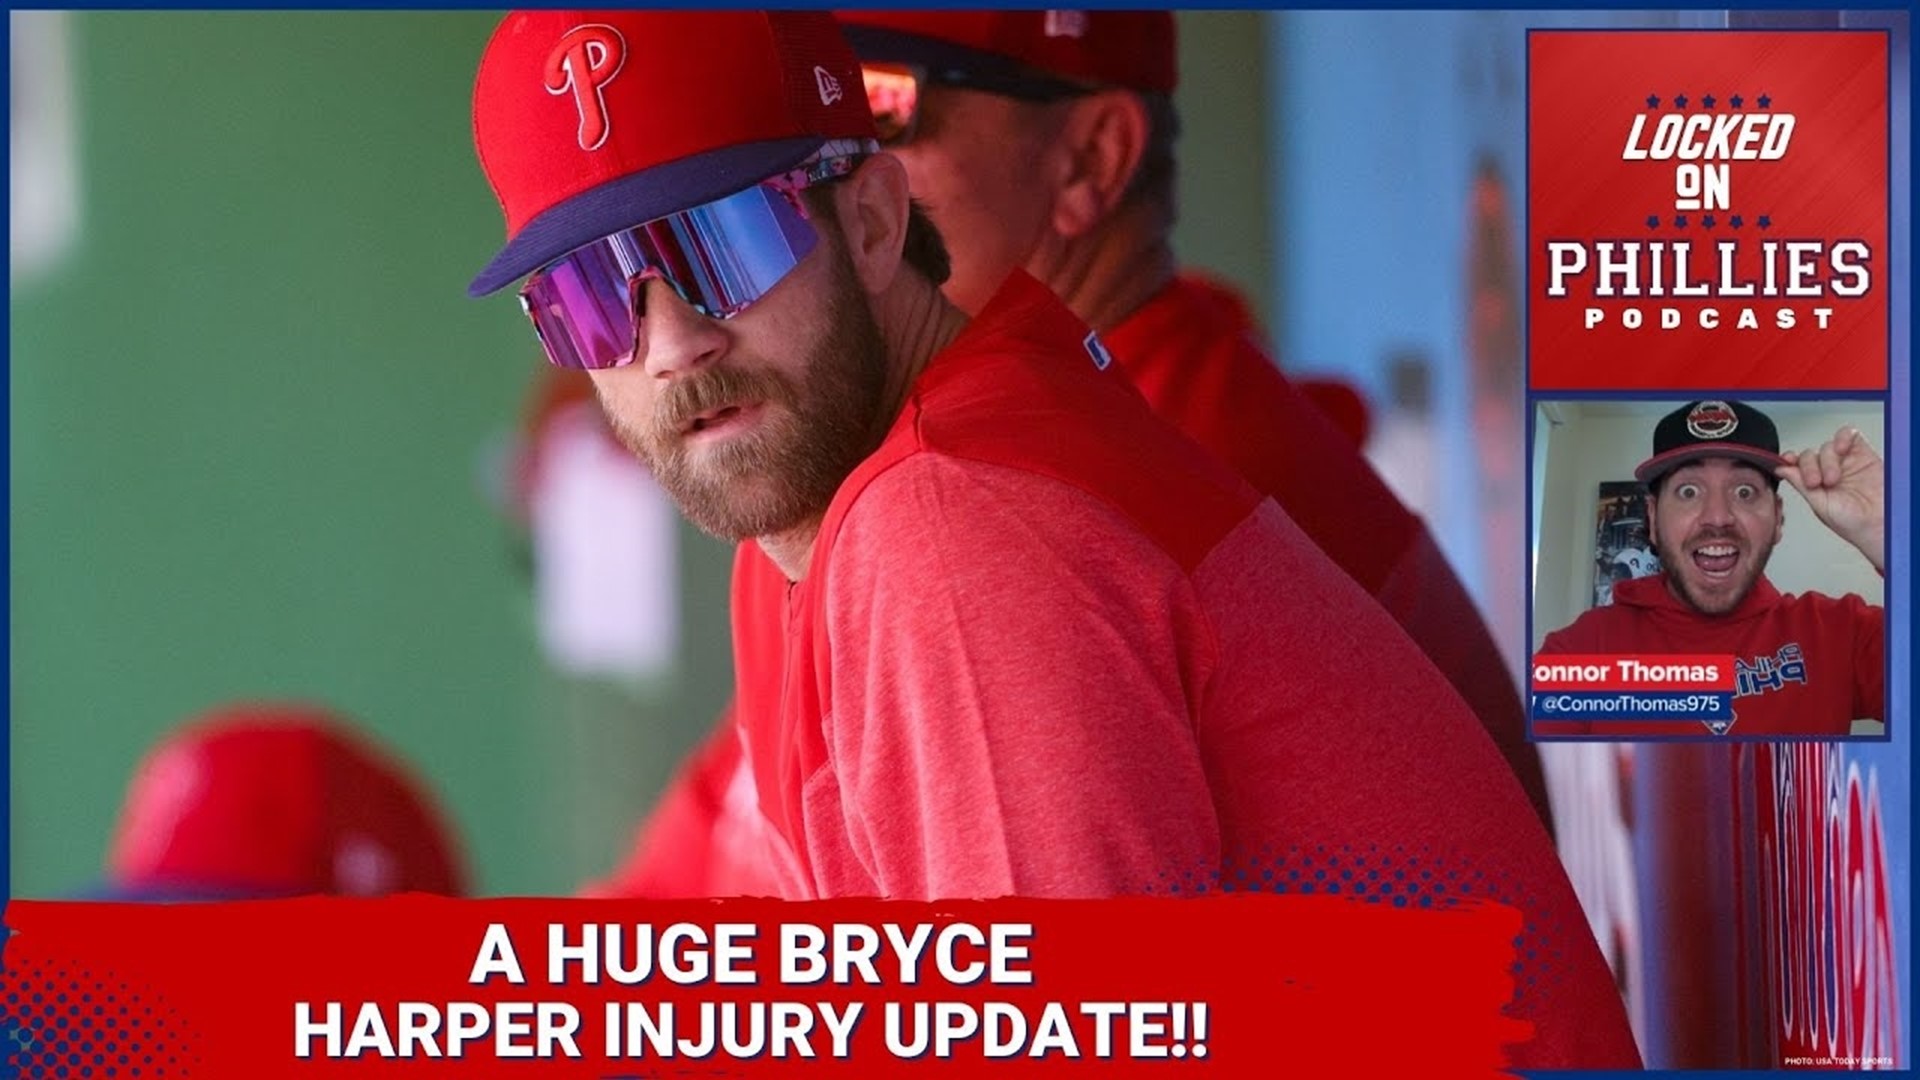 In today's episode, Connor reacts to some big news about the potential return date for Philadelphia Phillies' superstar Bryce Harper.